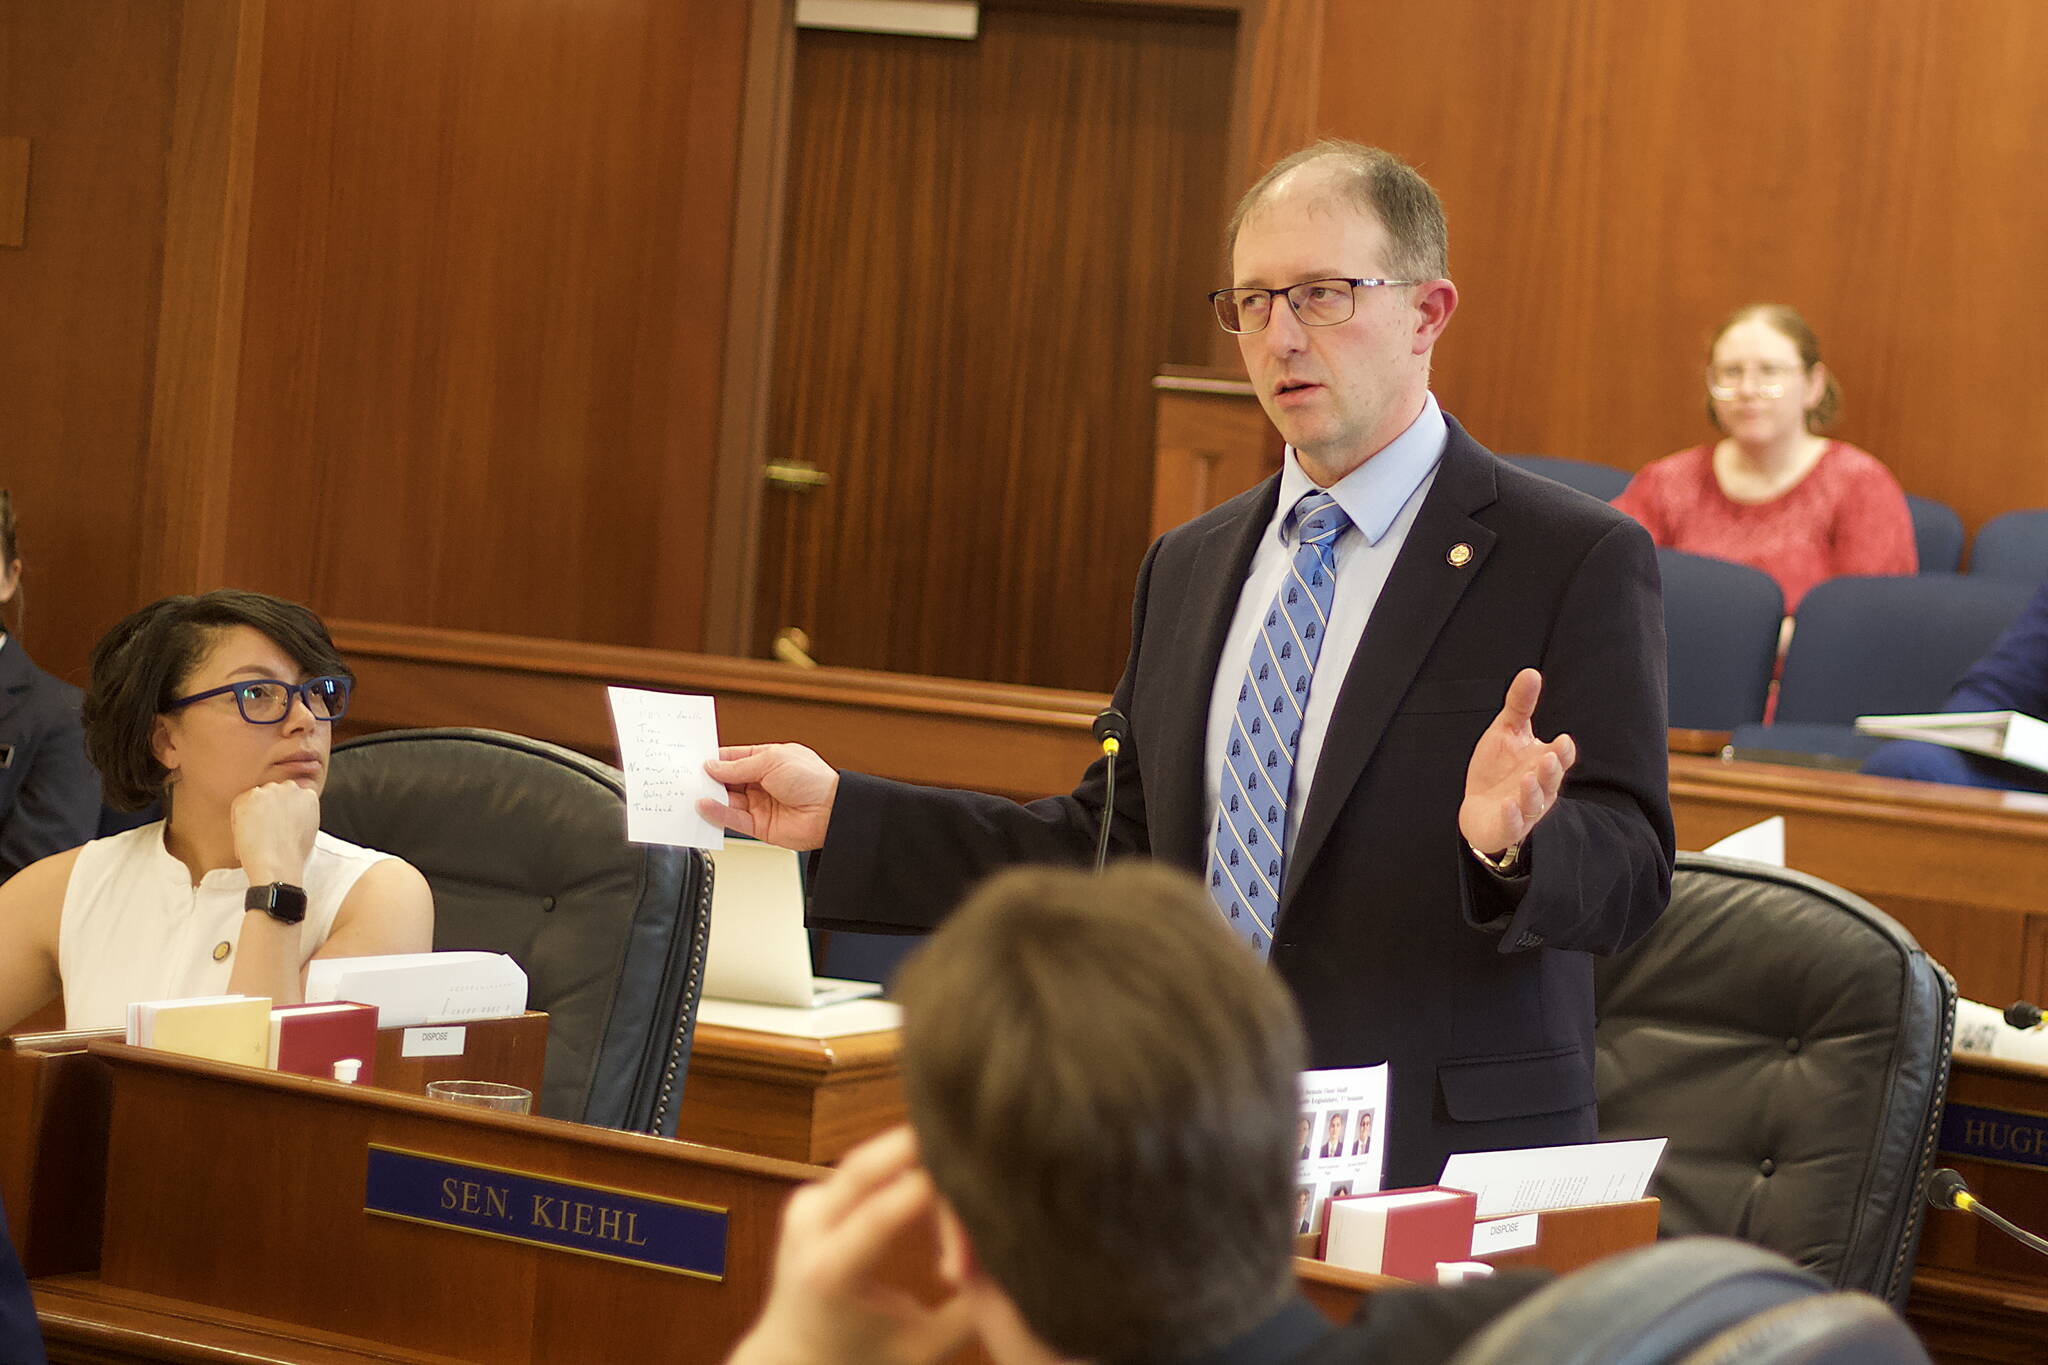 State Sen. Jesse Kiehl, D-Juneau, explains the details of his bill banning PFAS chemicals for most firefighting during the Senate floor session on Monday. The bill passed unanimously and now goes to the House for consideration. (Mark Sabbatini / Juneau Empire)